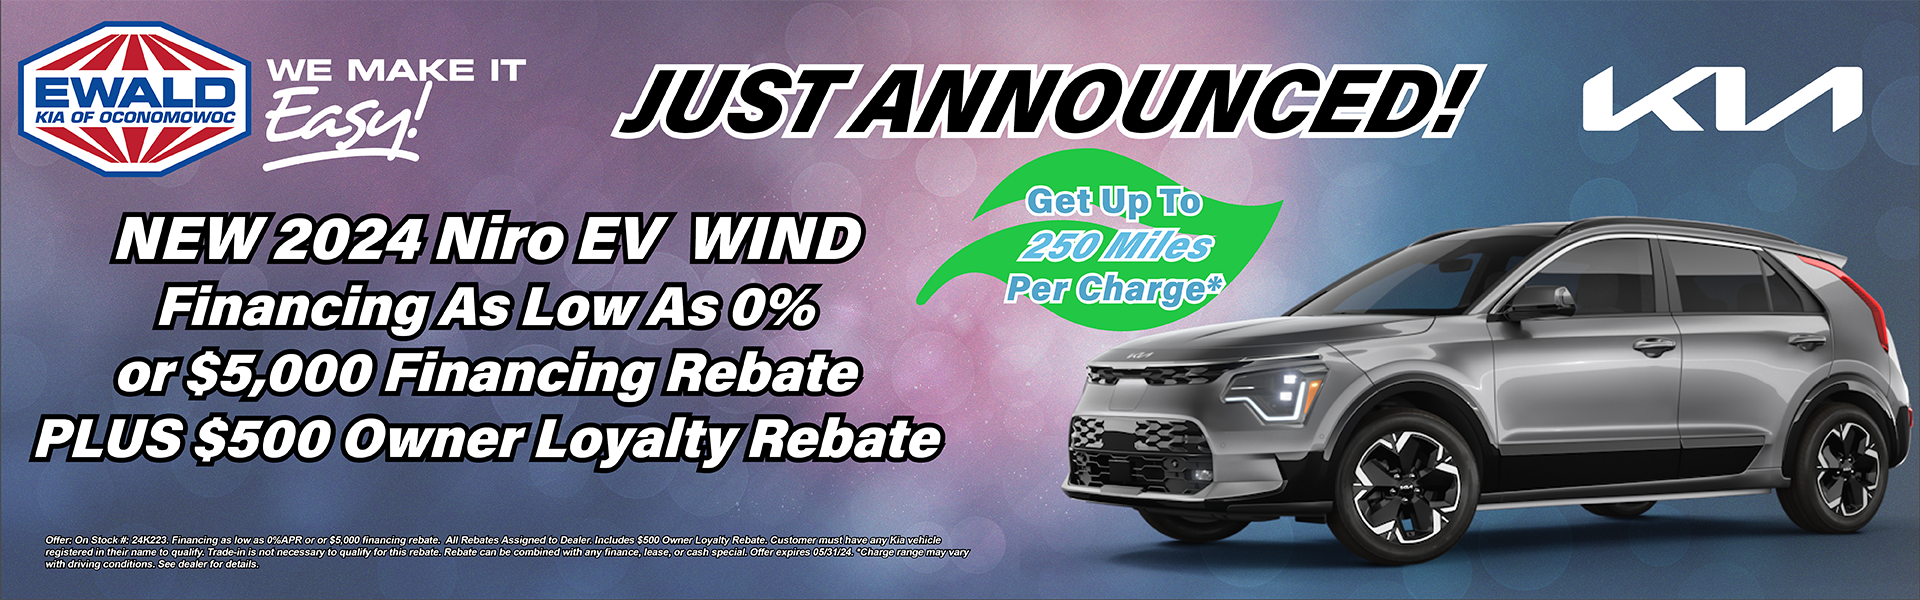 Save on the ALL NEW Niro EV Wind!